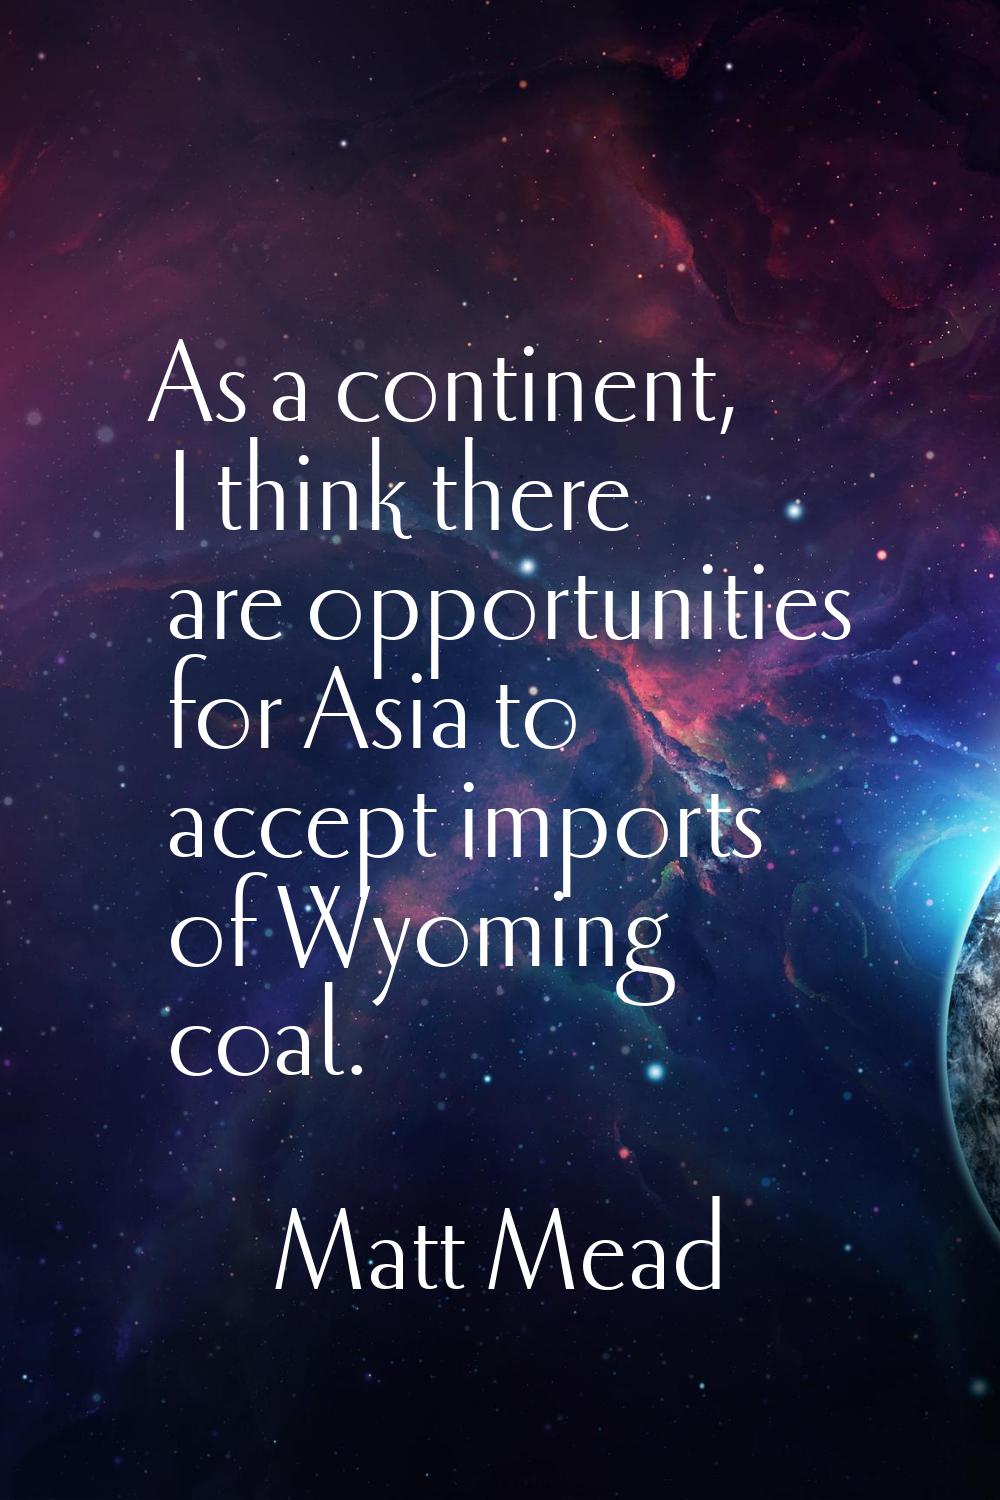 As a continent, I think there are opportunities for Asia to accept imports of Wyoming coal.